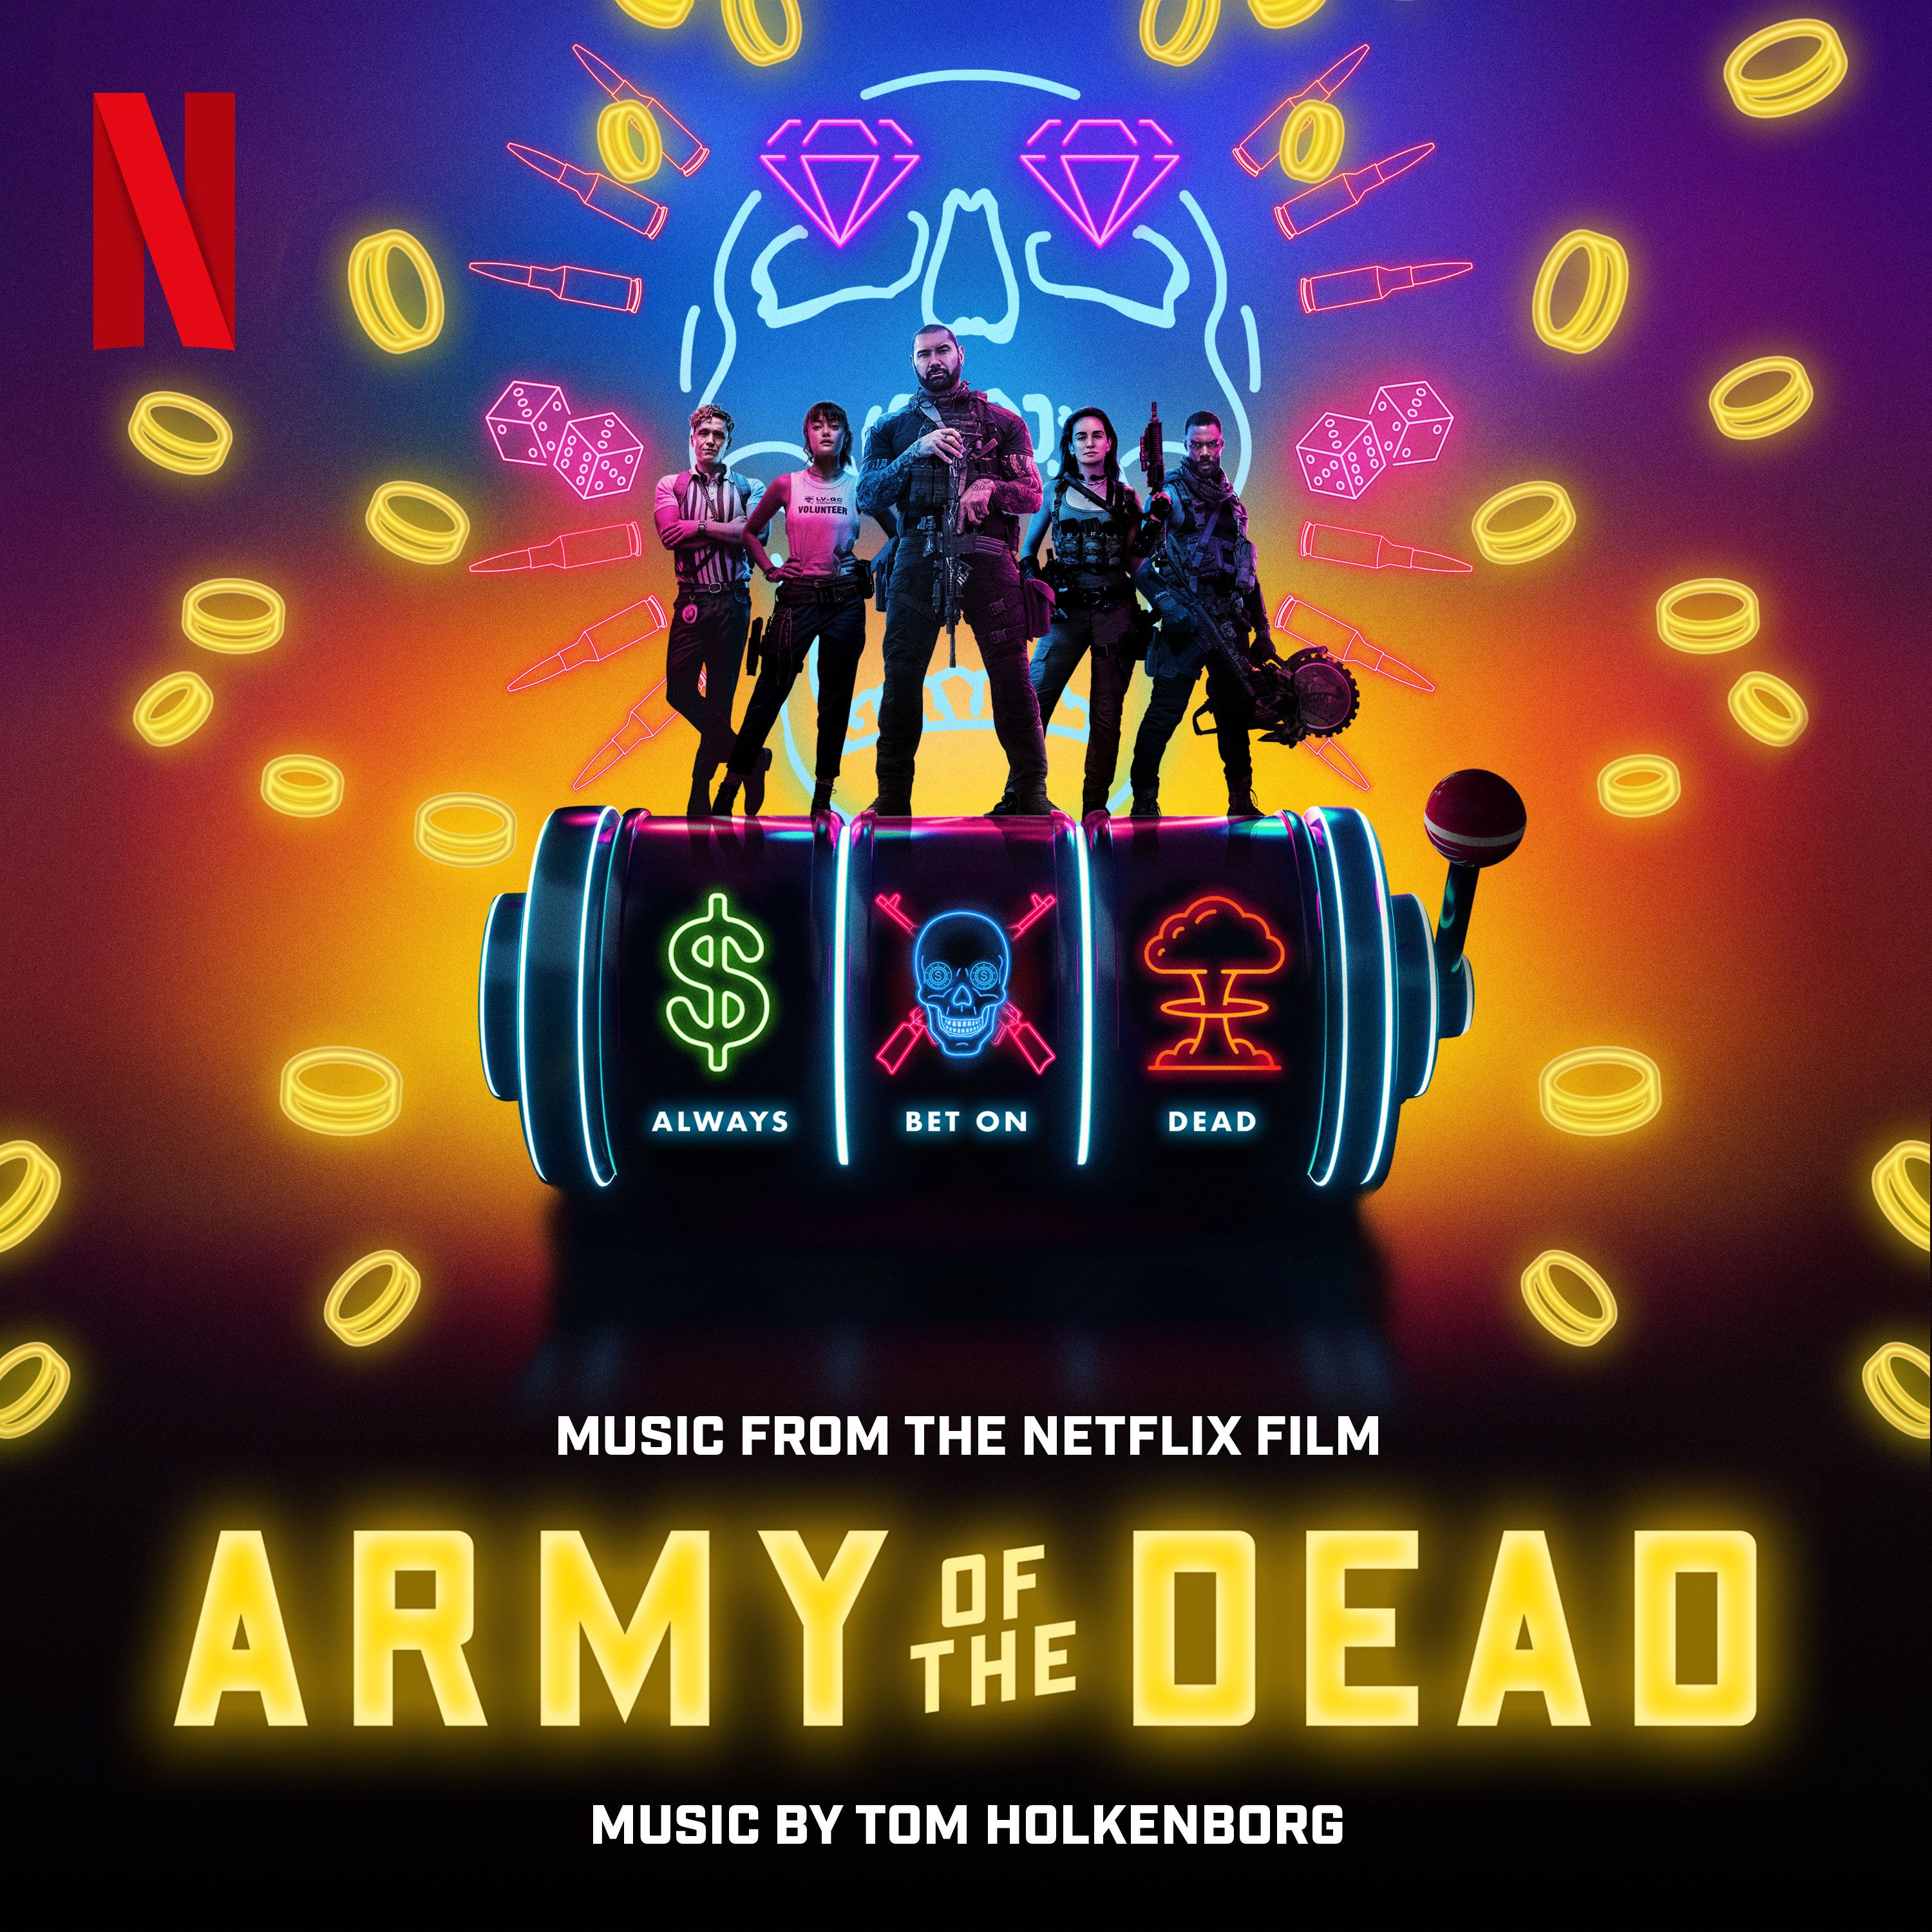 army-of-the-dead-soundtrack-artwork